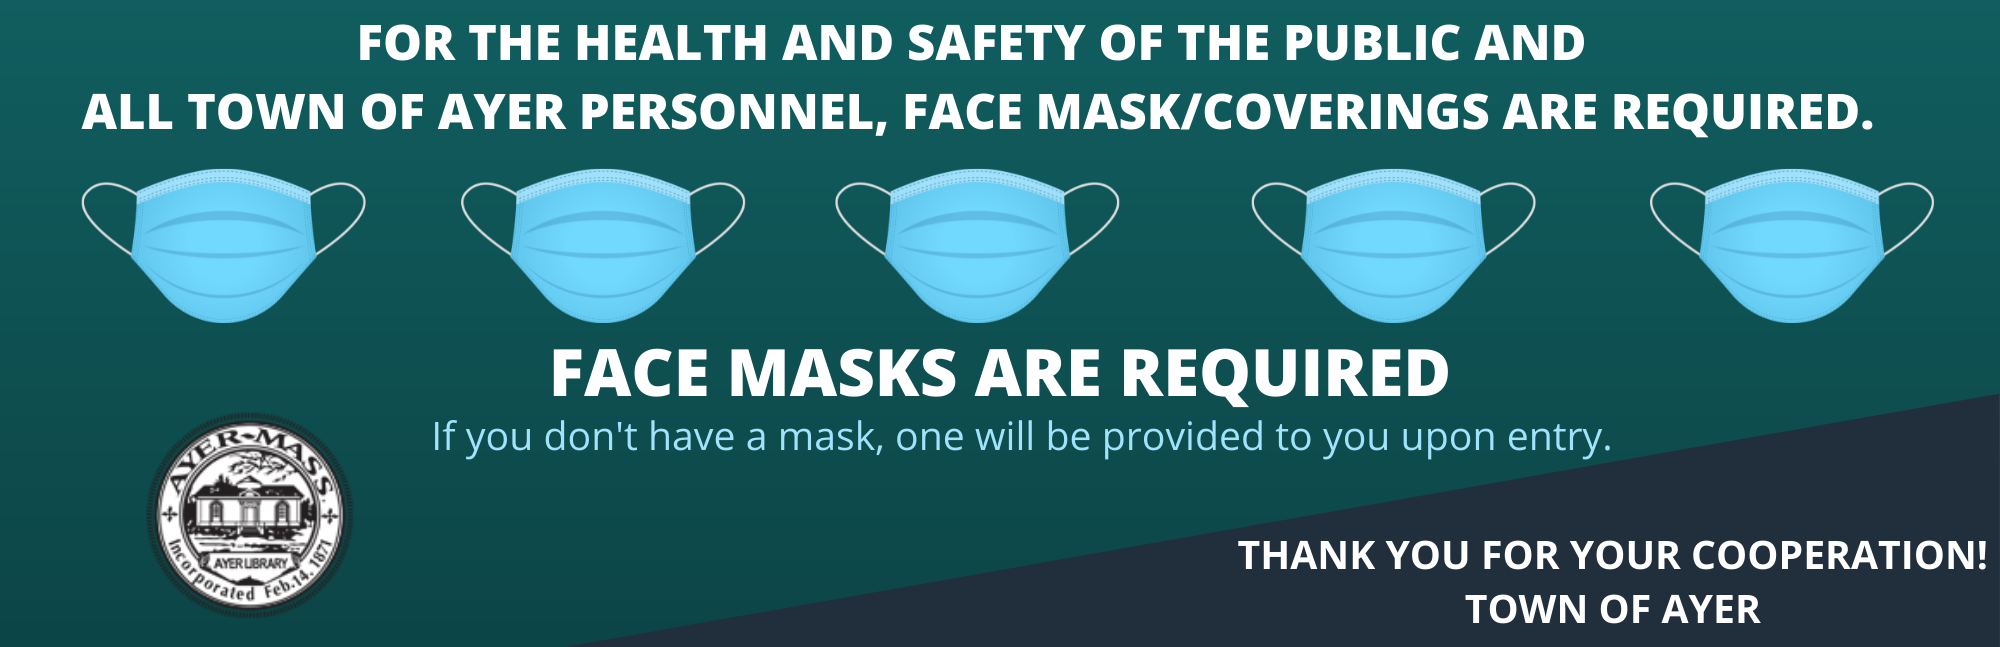 Face Masks Required.pdf (8.5 x 2.75 in)